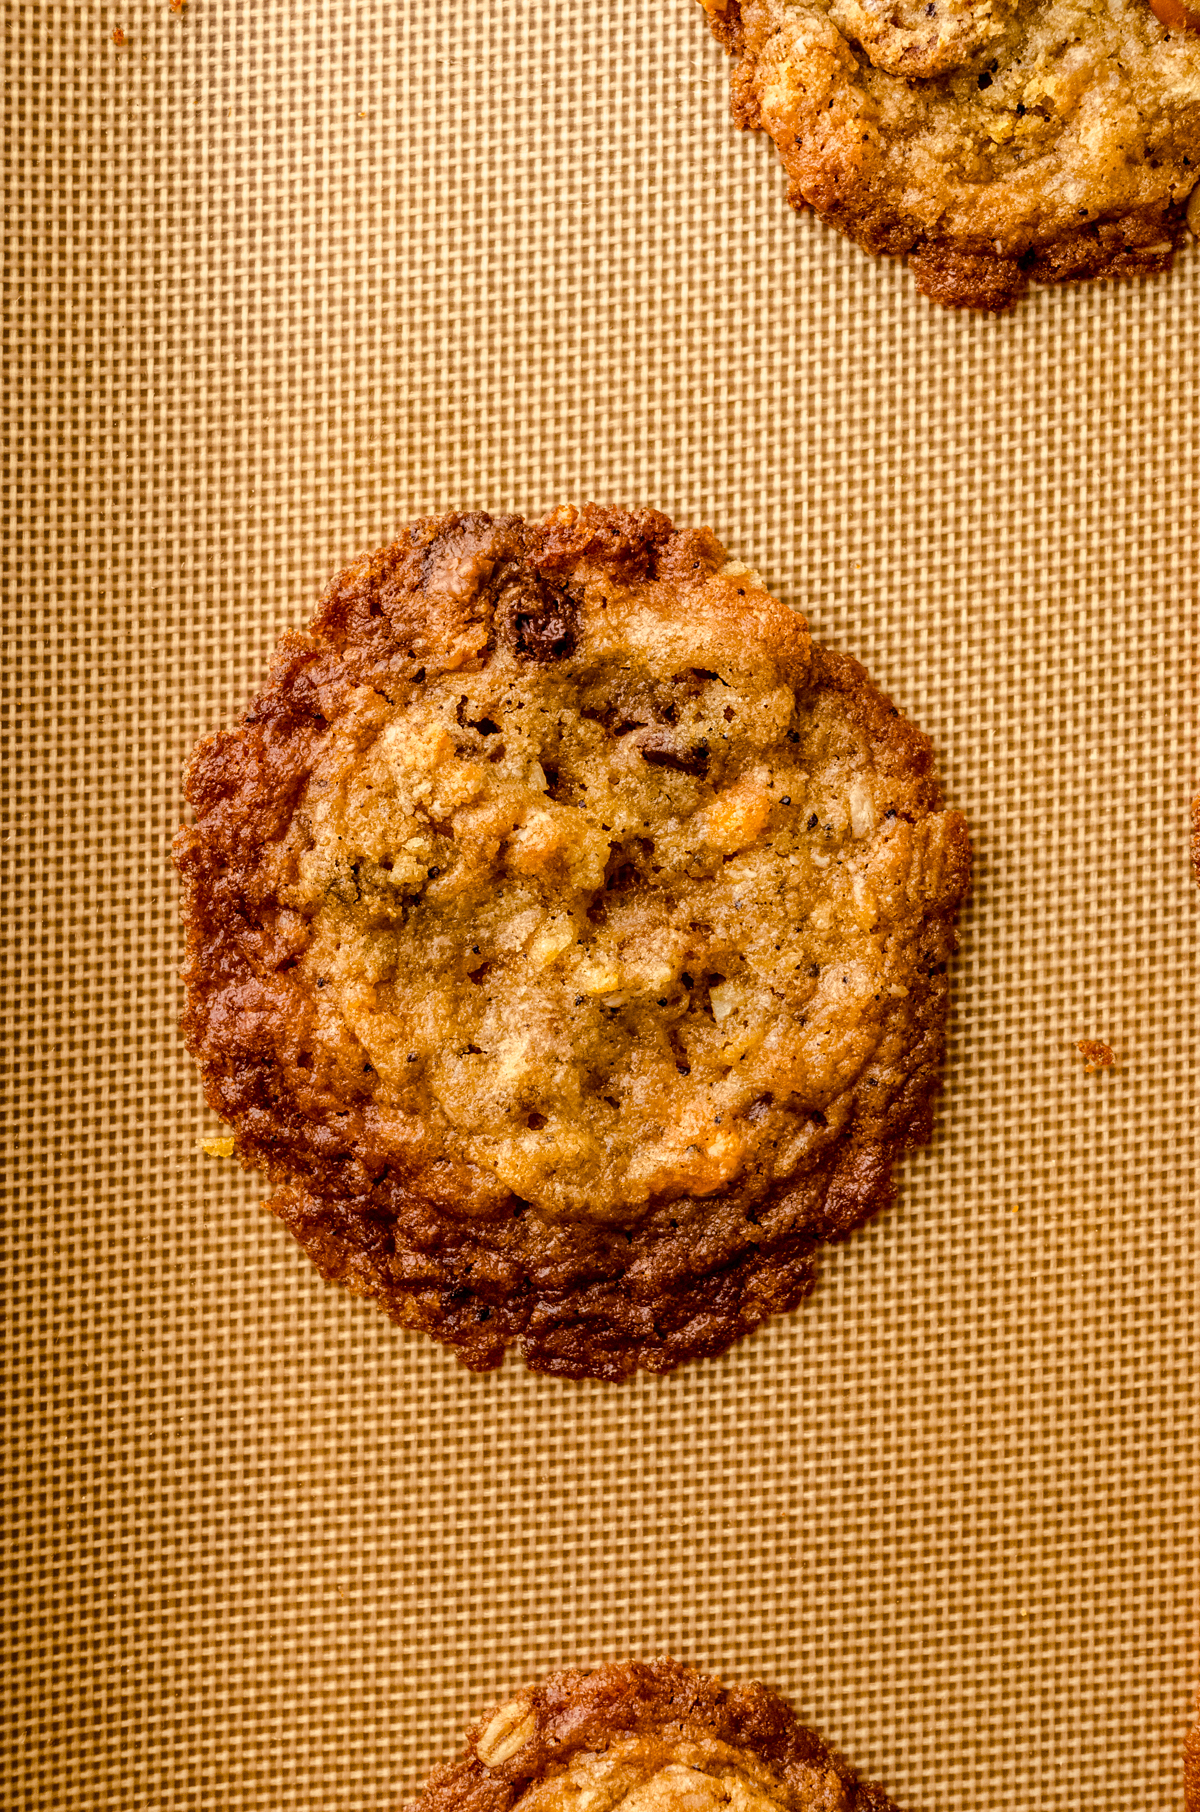 A compost cookie that has been baked on silicone which made it spread too much.